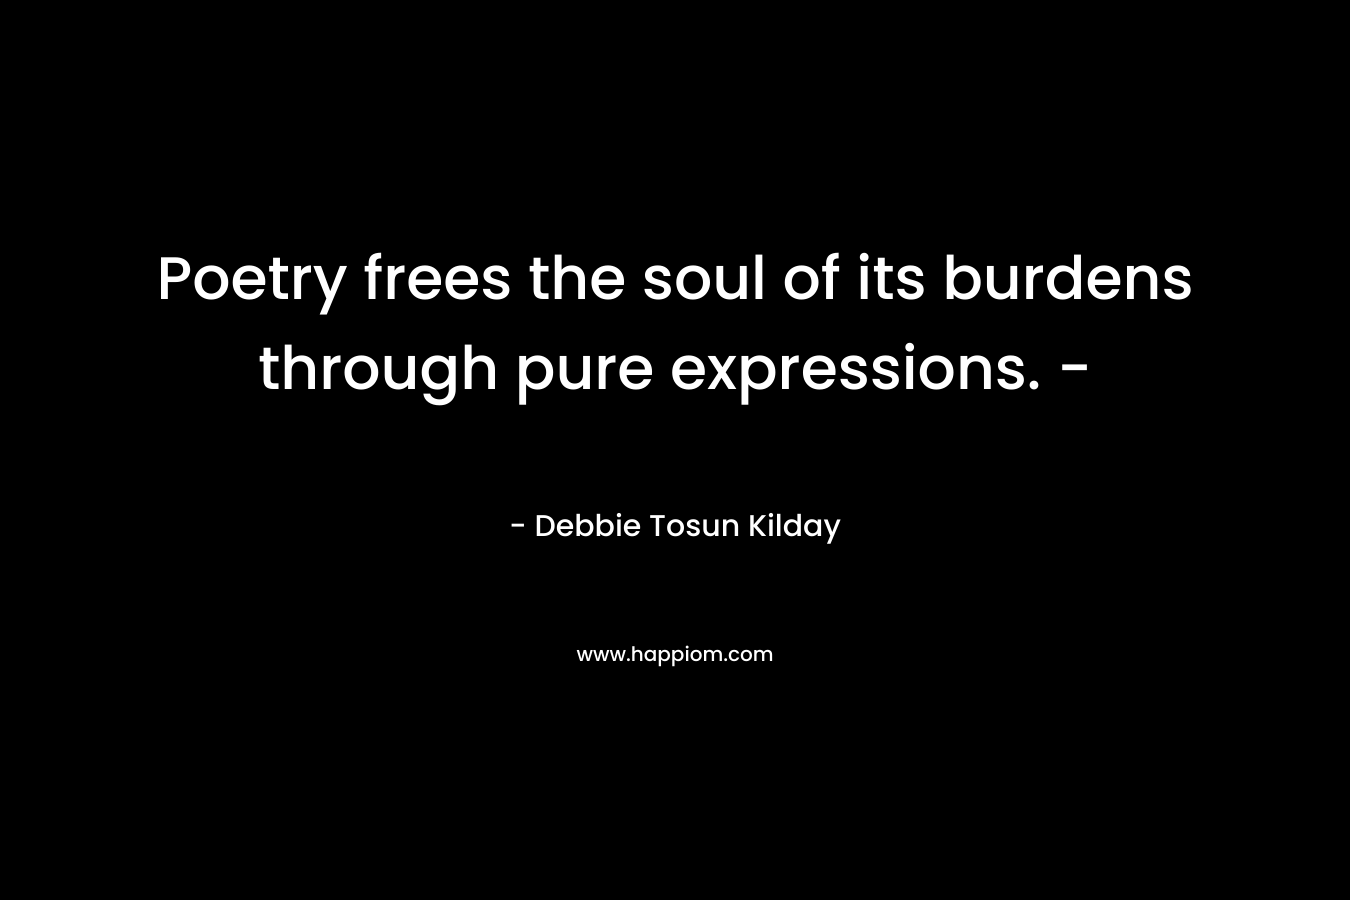 Poetry frees the soul of its burdens through pure expressions. – – Debbie Tosun Kilday